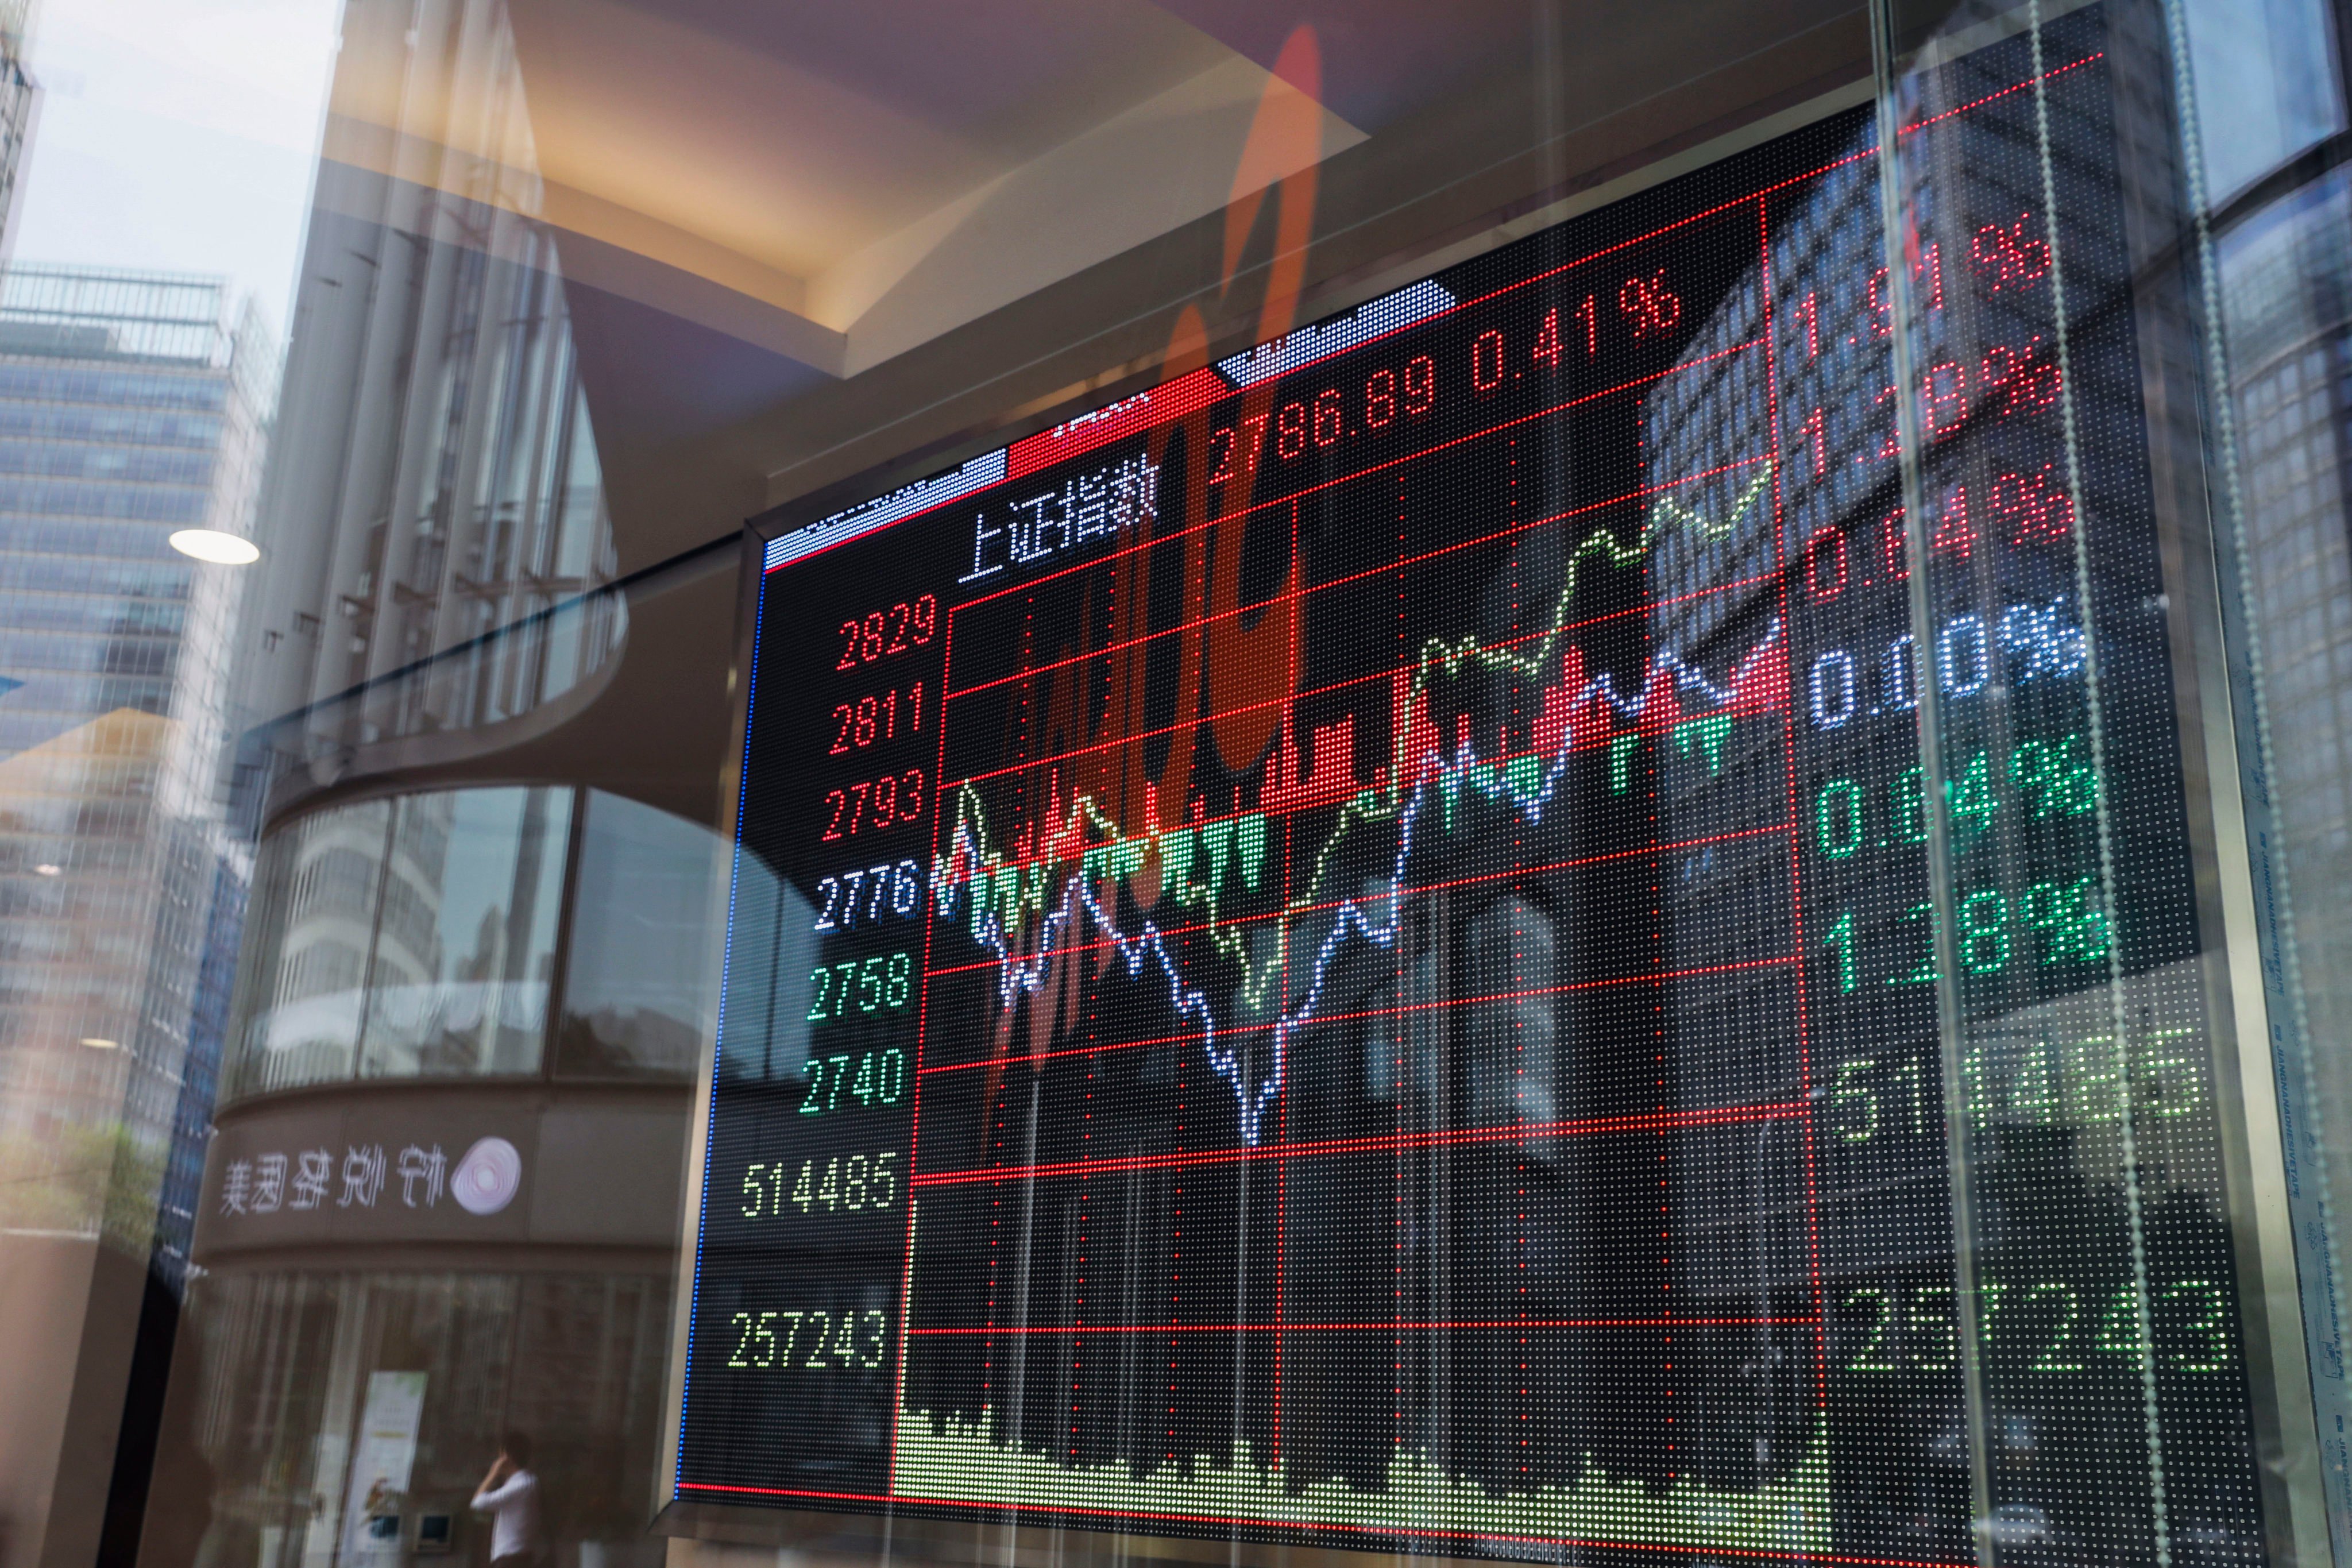 A screen shows China’s Shanghai stock index is closed at 2786.89, 0.41 per cent up,  on Tuesday, in Beijing’s CBD area on  Jul. 3, 2018.  03JUL18  SCMP/Simon Song